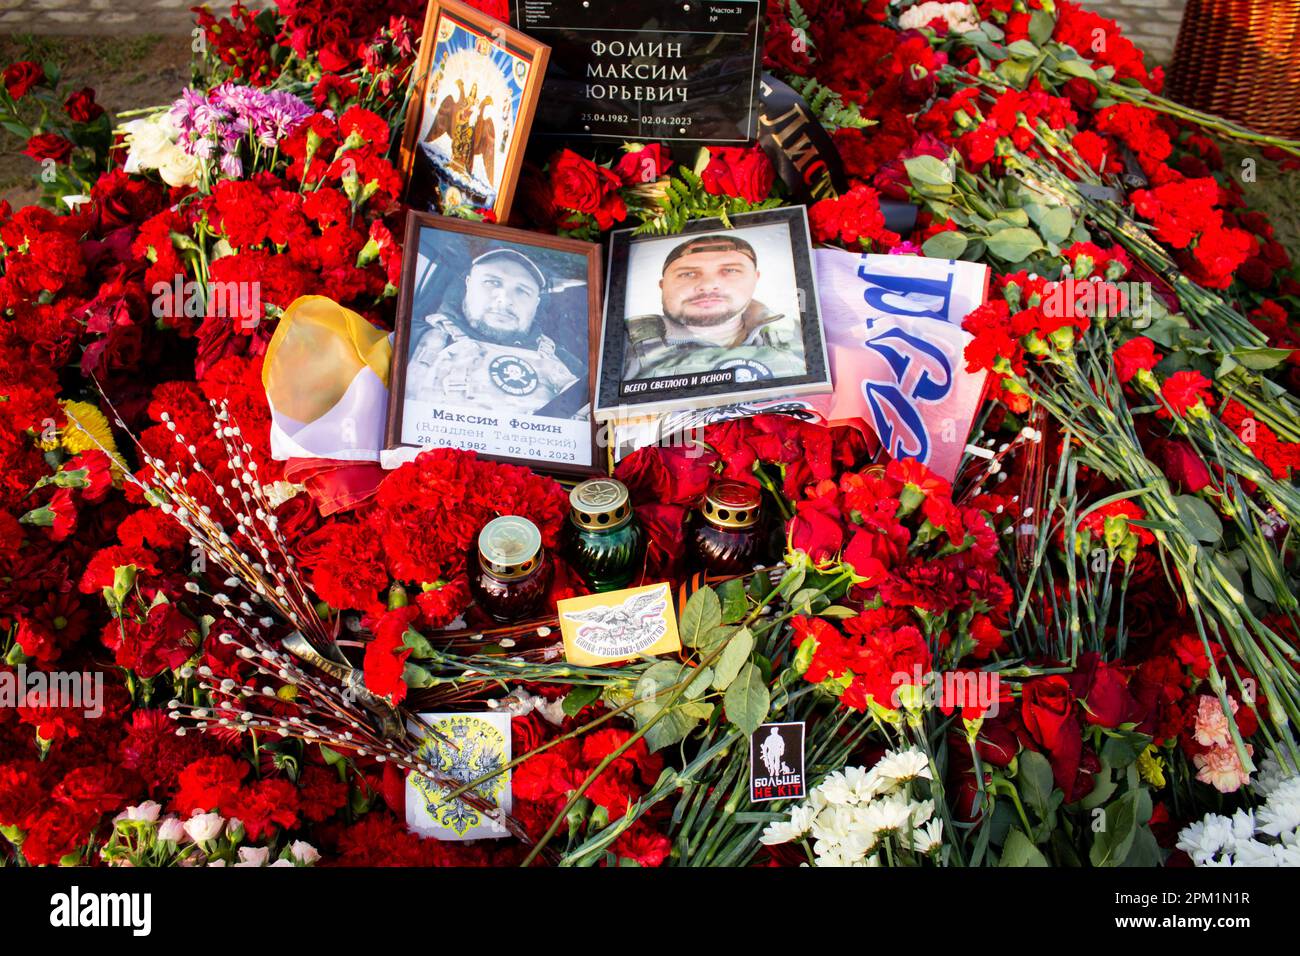 Pictures of Vladlen Tatarsky and flowers seen at his grave at Troyekurovskoye cemetery in Moscow. Maxim Fomin better known by his pen-name Vladlen Tatarsky was a convicted criminal who escaped from prison and made a name for himself as a Ukrainian-born Russian military blogger and a participant in the war between Russian and Ukraine. He was active as a propagandist for the Russian side in the war until he was murdered in a terrorist act in St. Petersburg on April 2, 2023. 26-year-old woman named Darya Trepova was arrested for the bombing that had killed Tatarsky and injured dozens of others. Stock Photo